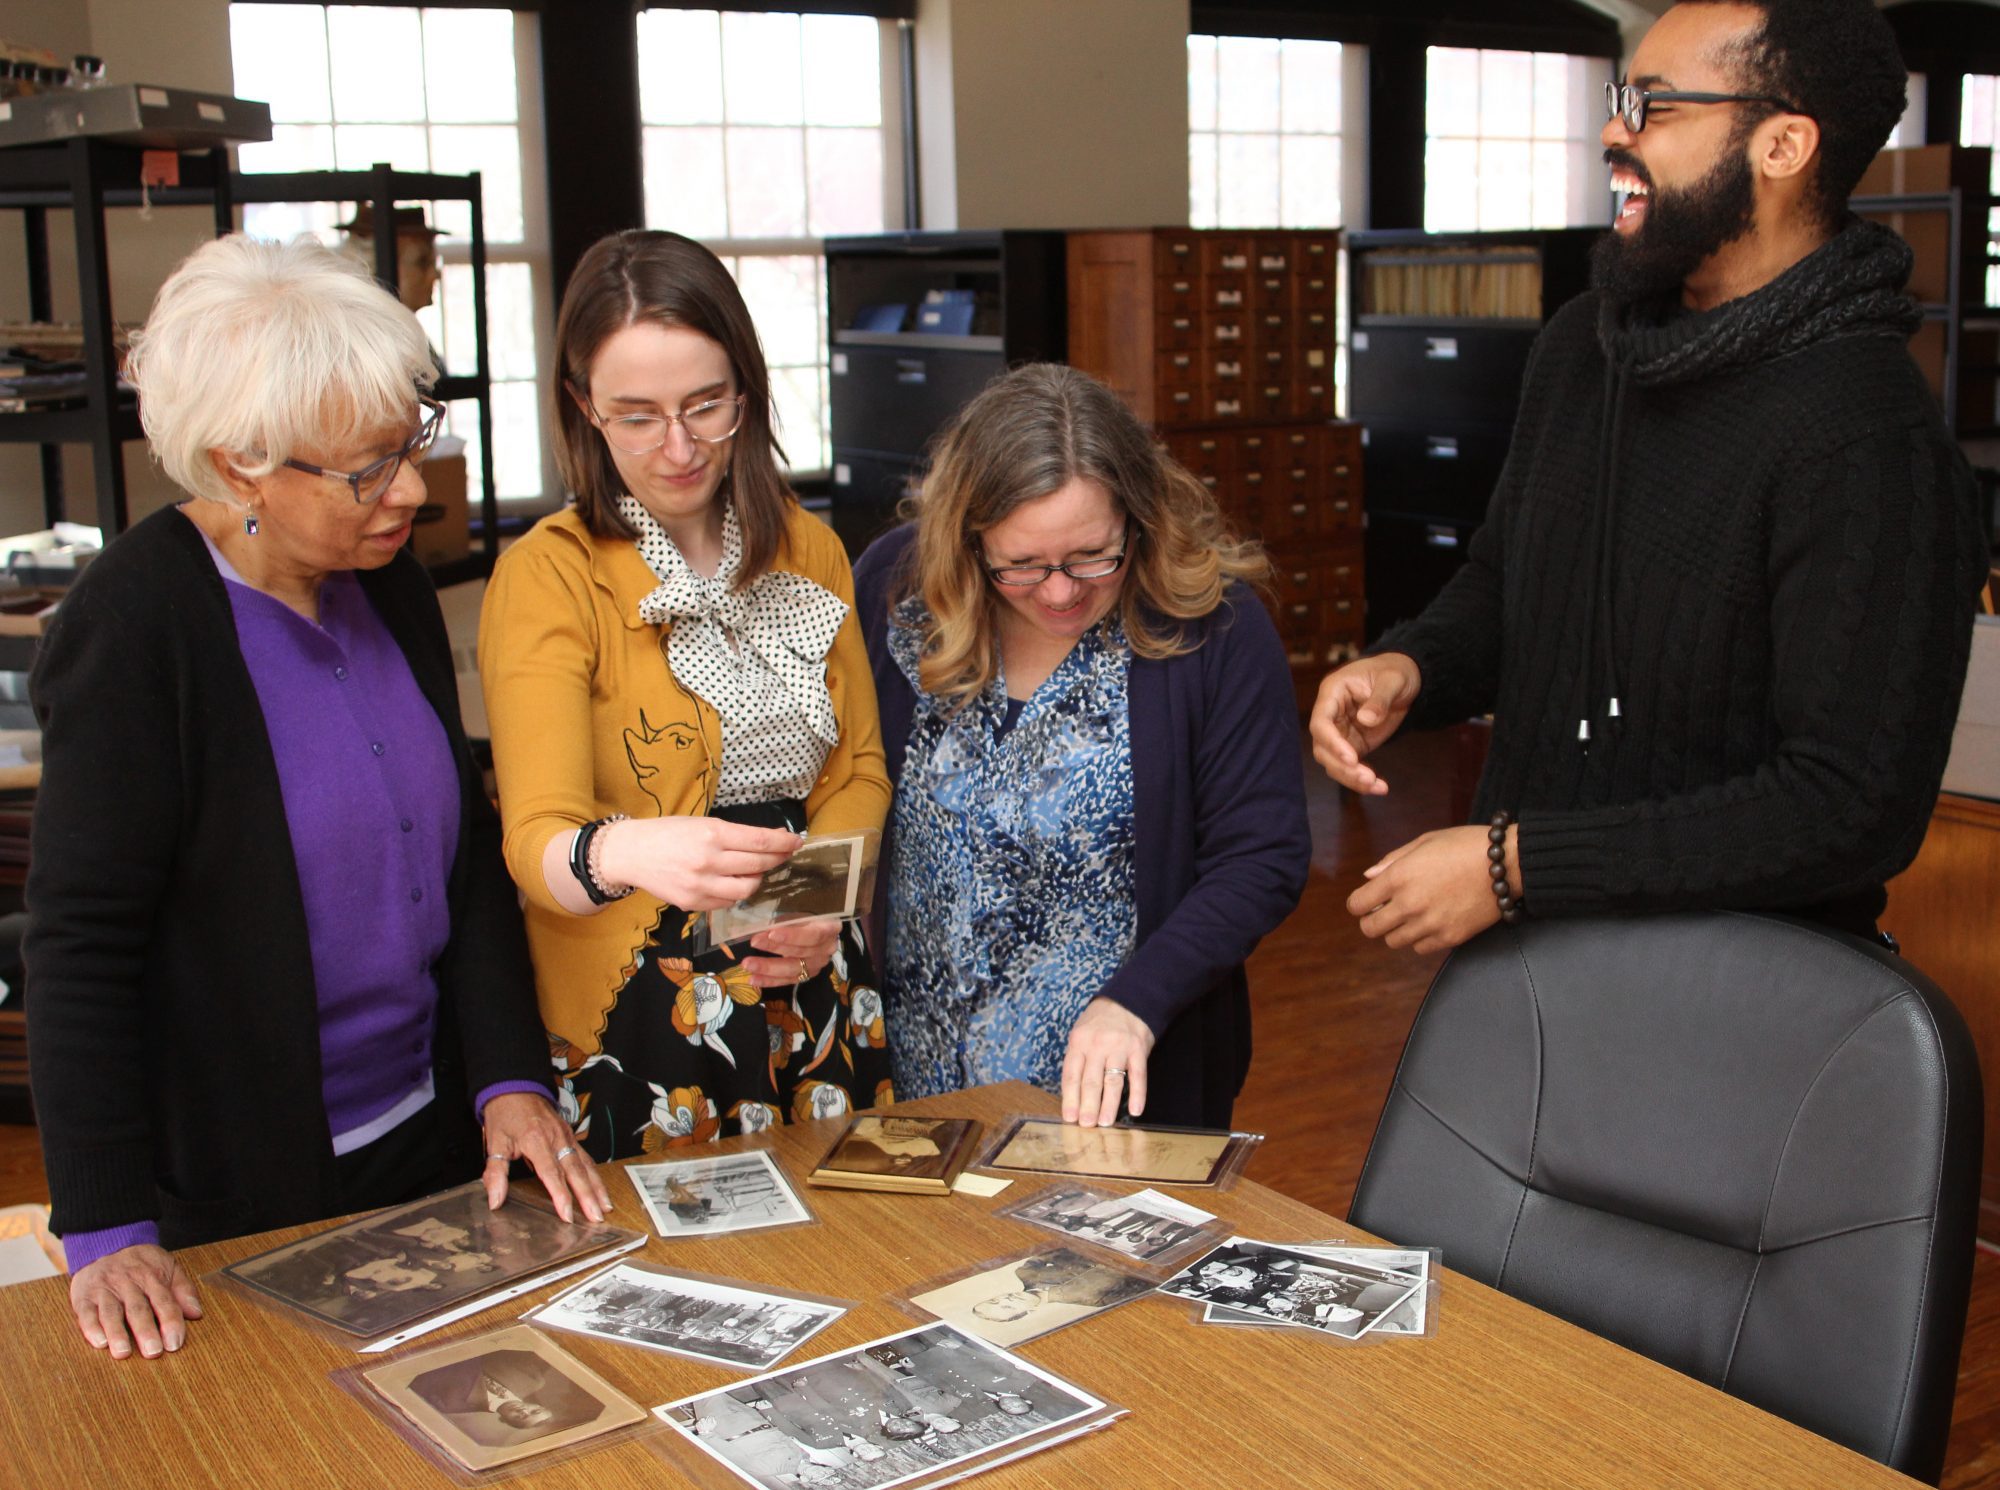 Lynn, Ma. 2/13/19. From left to right: Iris Kimber, Judith Marhsall, Sue Walker, and Richard Valentine look through photographs that will be part of the Untold Stores Exhibit at the Lynn Musuem this summer.